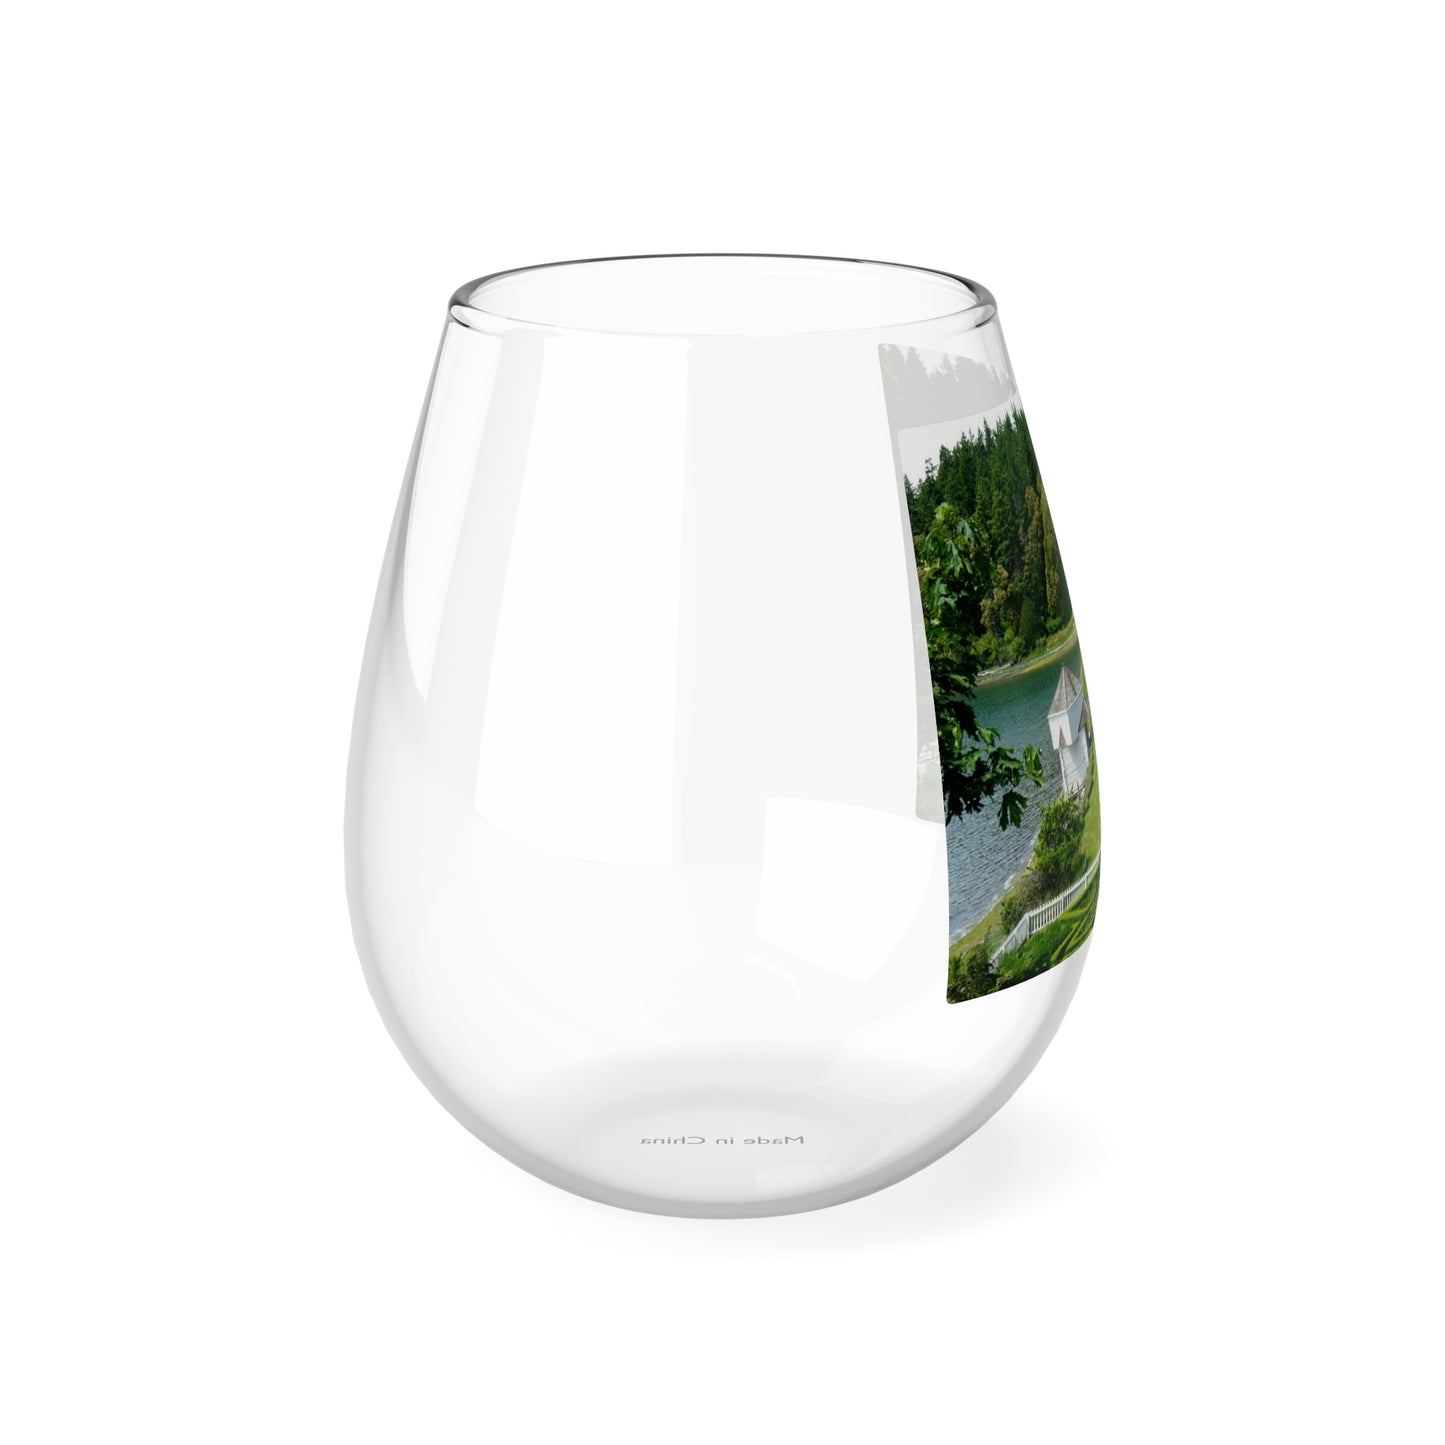 Magnificent Grandiose Views - Stemless Wine Glass, 11.75 oz - Fry1Productions